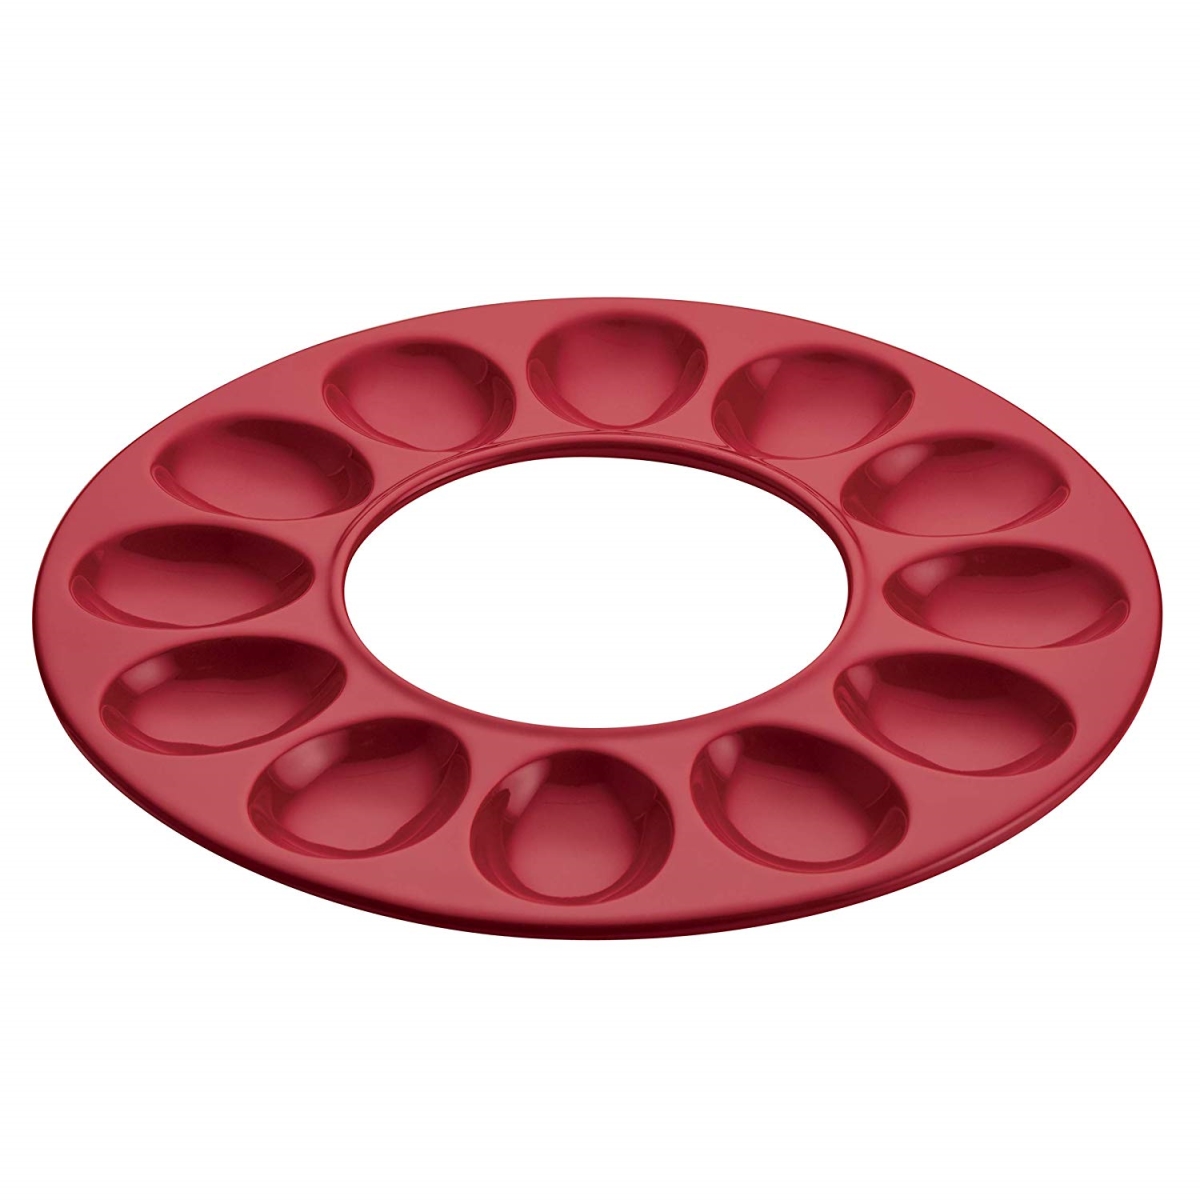 47867 Ceramics 12-cup Round Egg Tray, Red